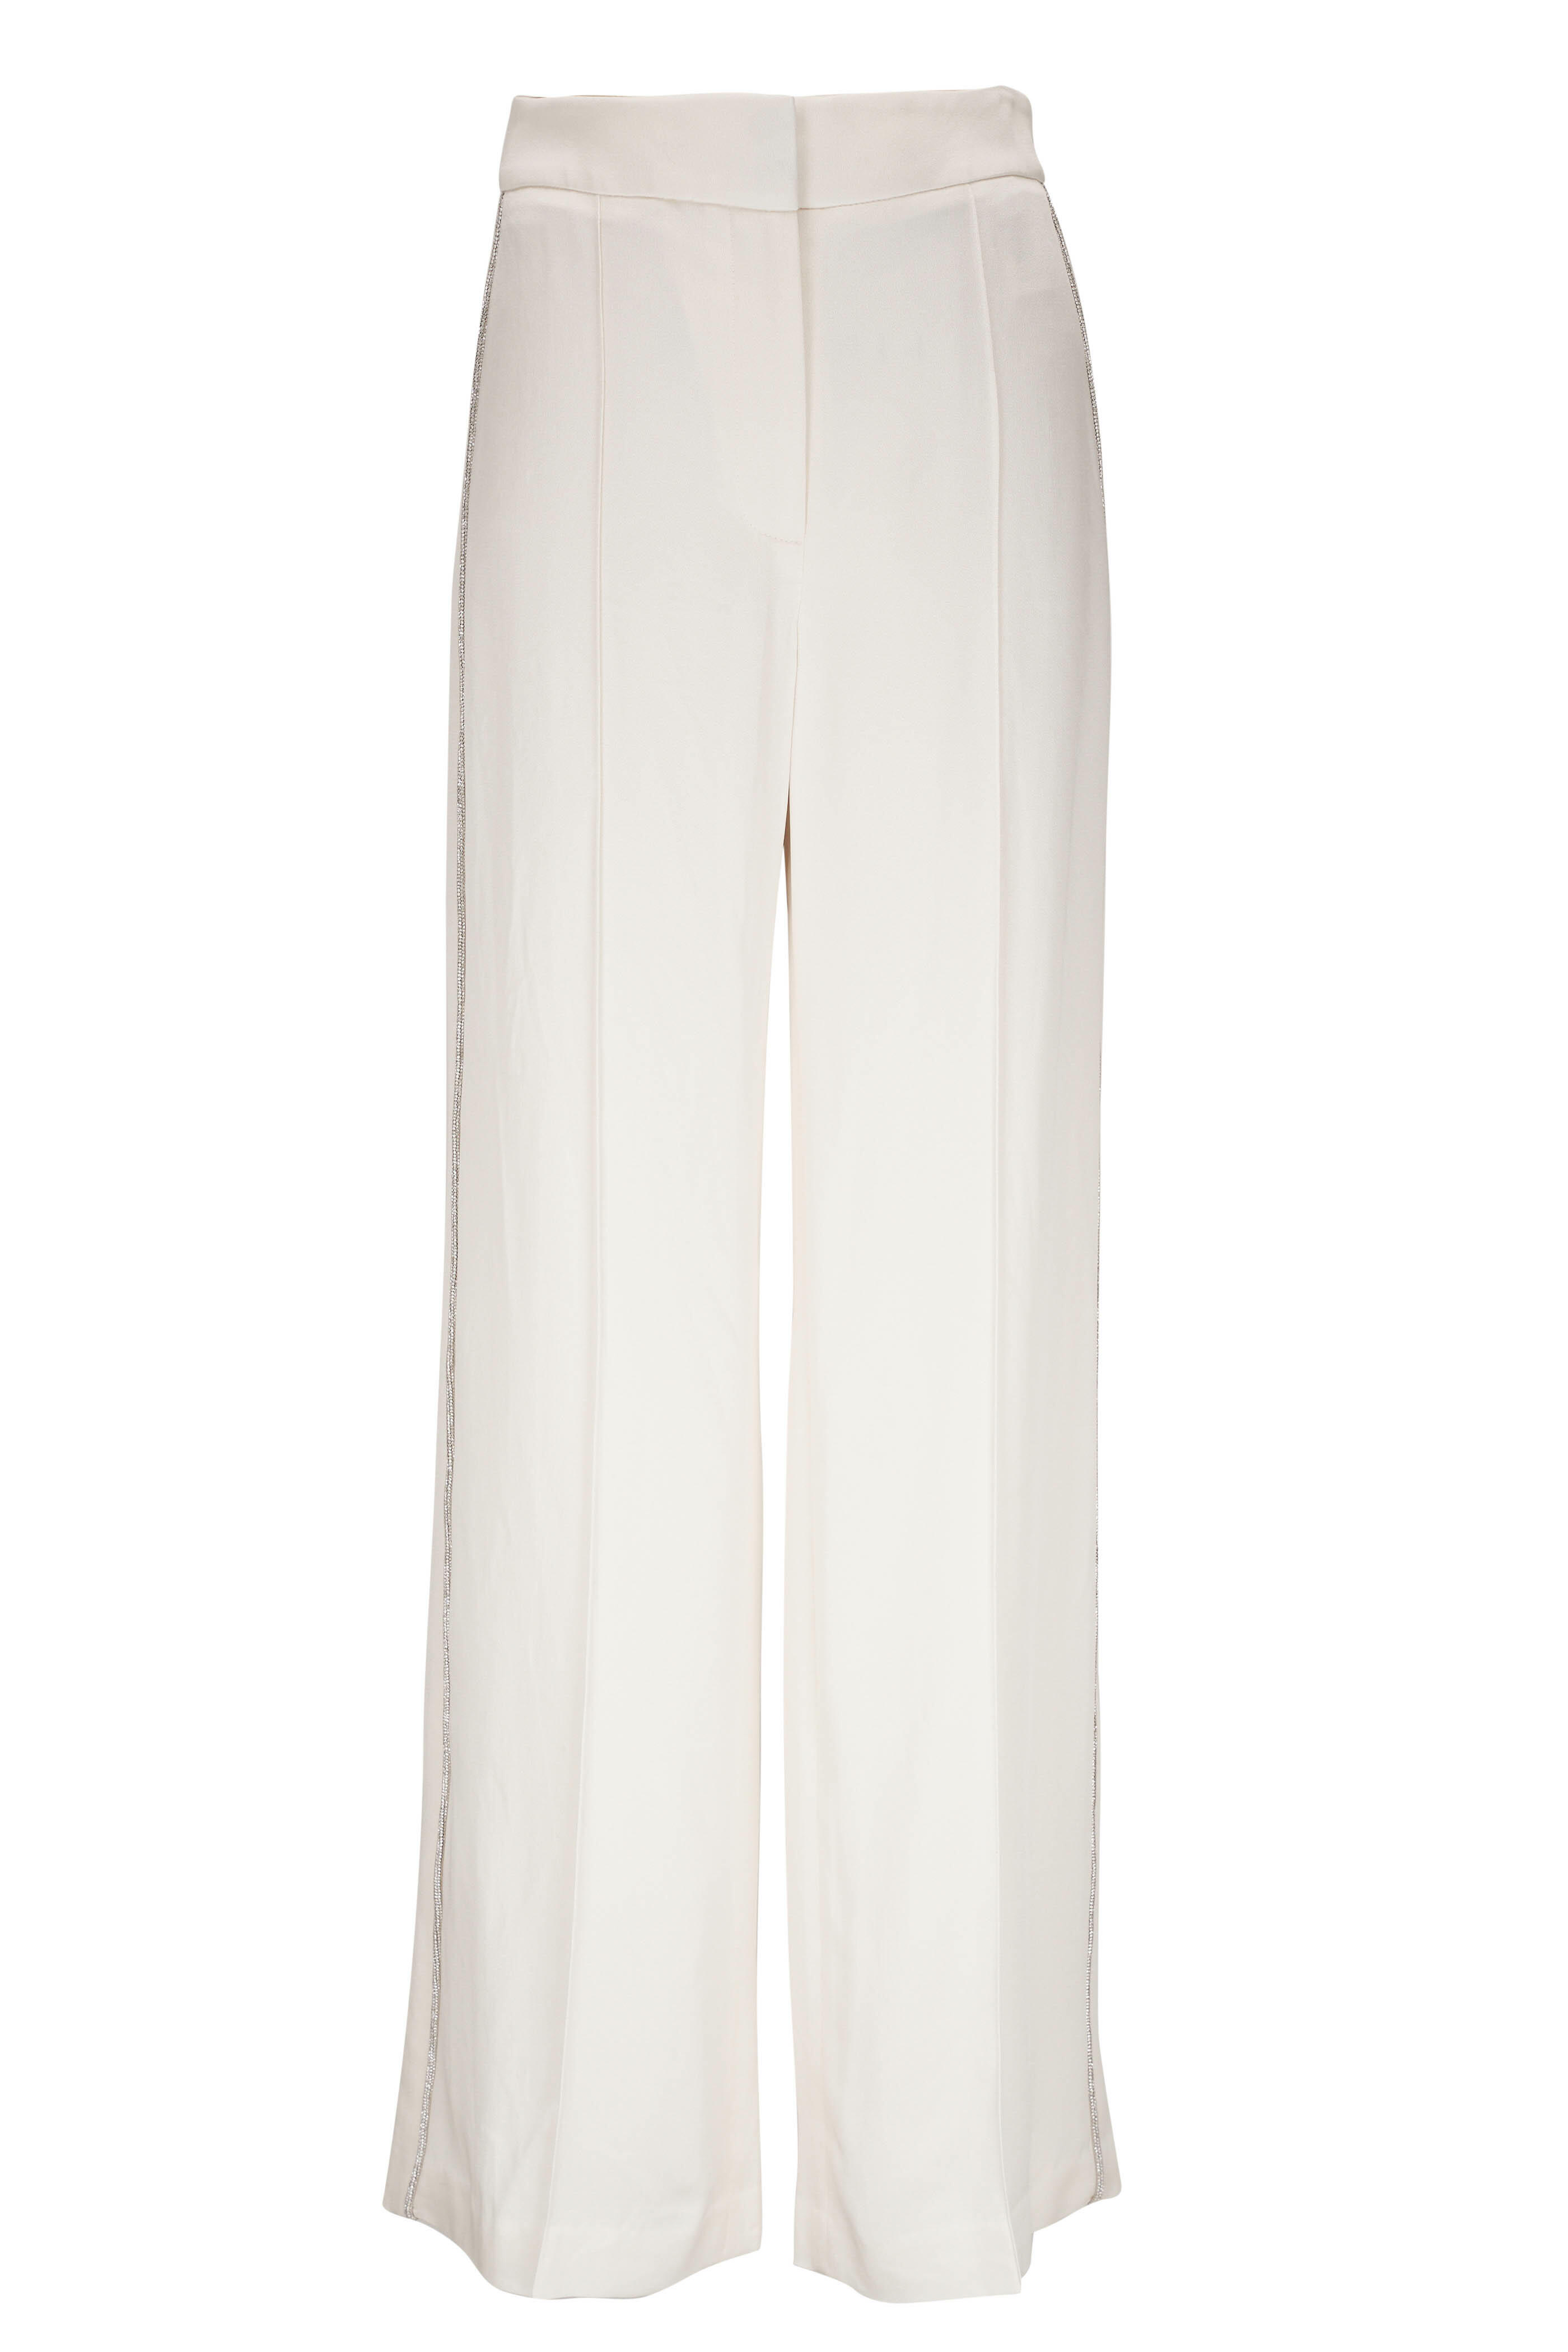 Veronica Beard - Millicent Winter White Embellished Evening Pant